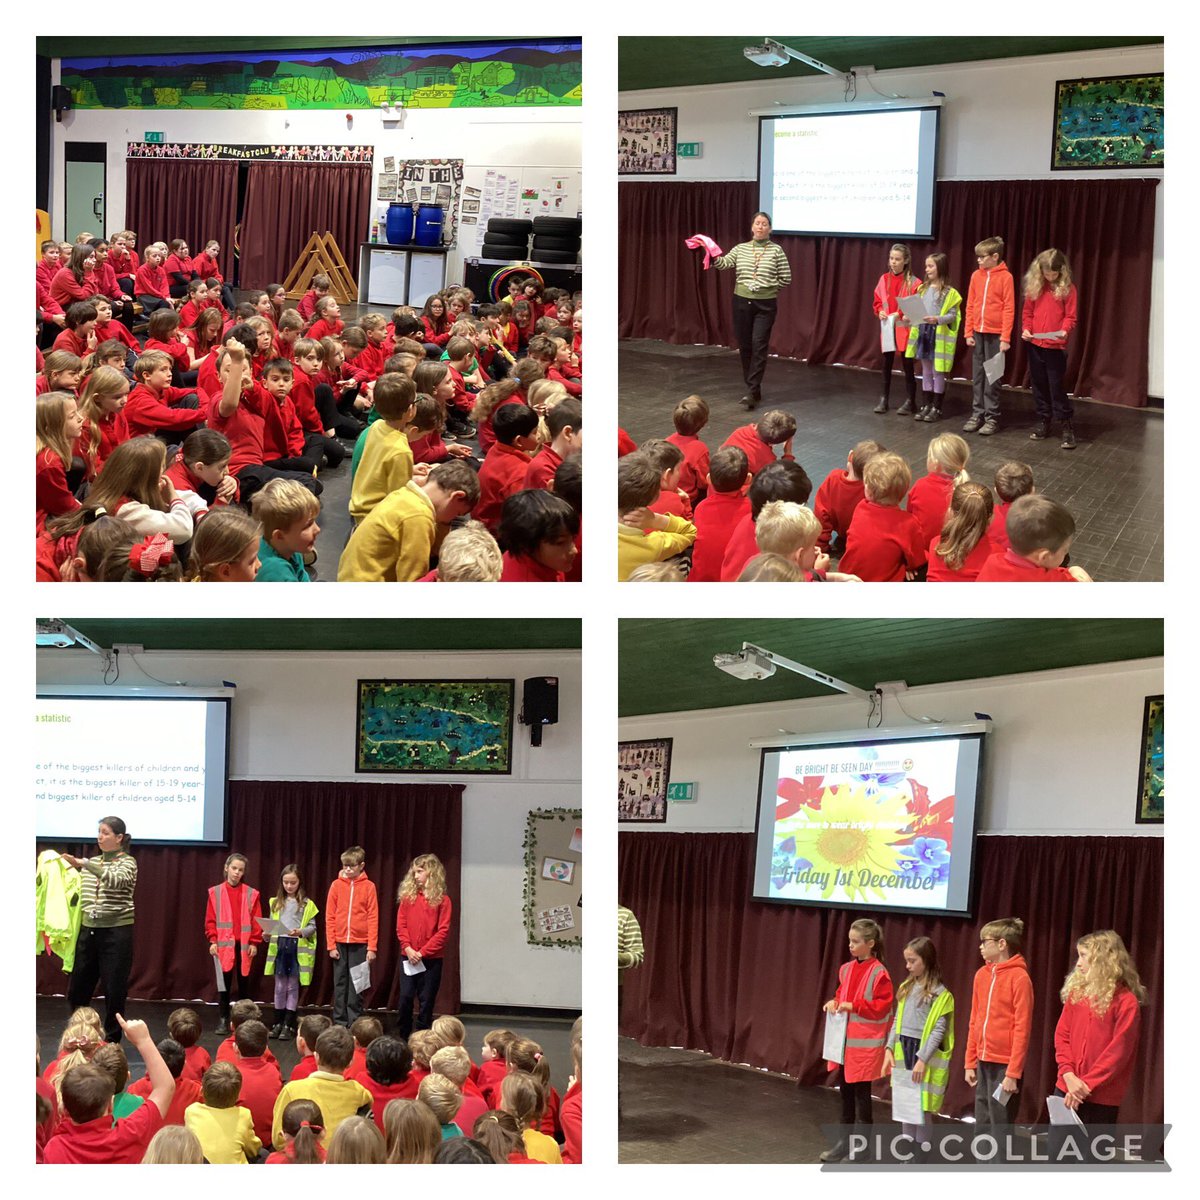 A really informative assembly this morning from our JRSO on ways to keep safe during the darker months when using roads. All ready for our be bright be seen day tomorrow. #bebrightbeseen #jrso #reflective